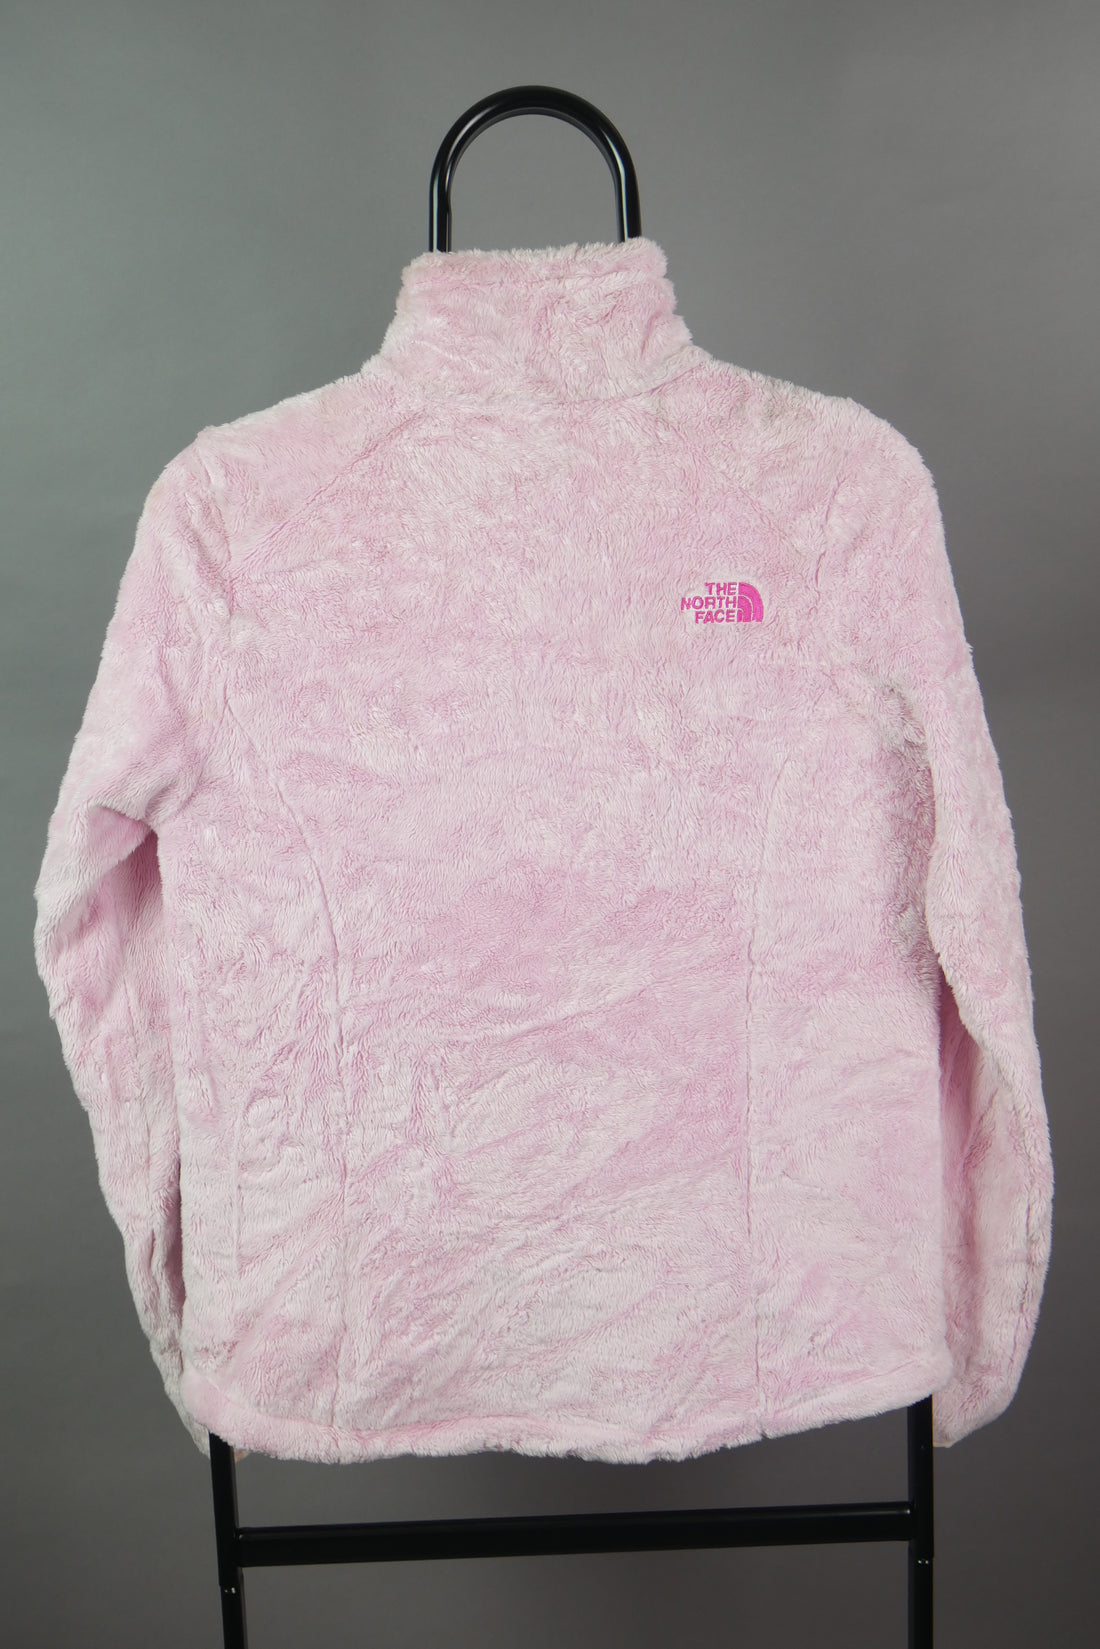 The North Face Fluffy Zip Up Jacket (Womens S)